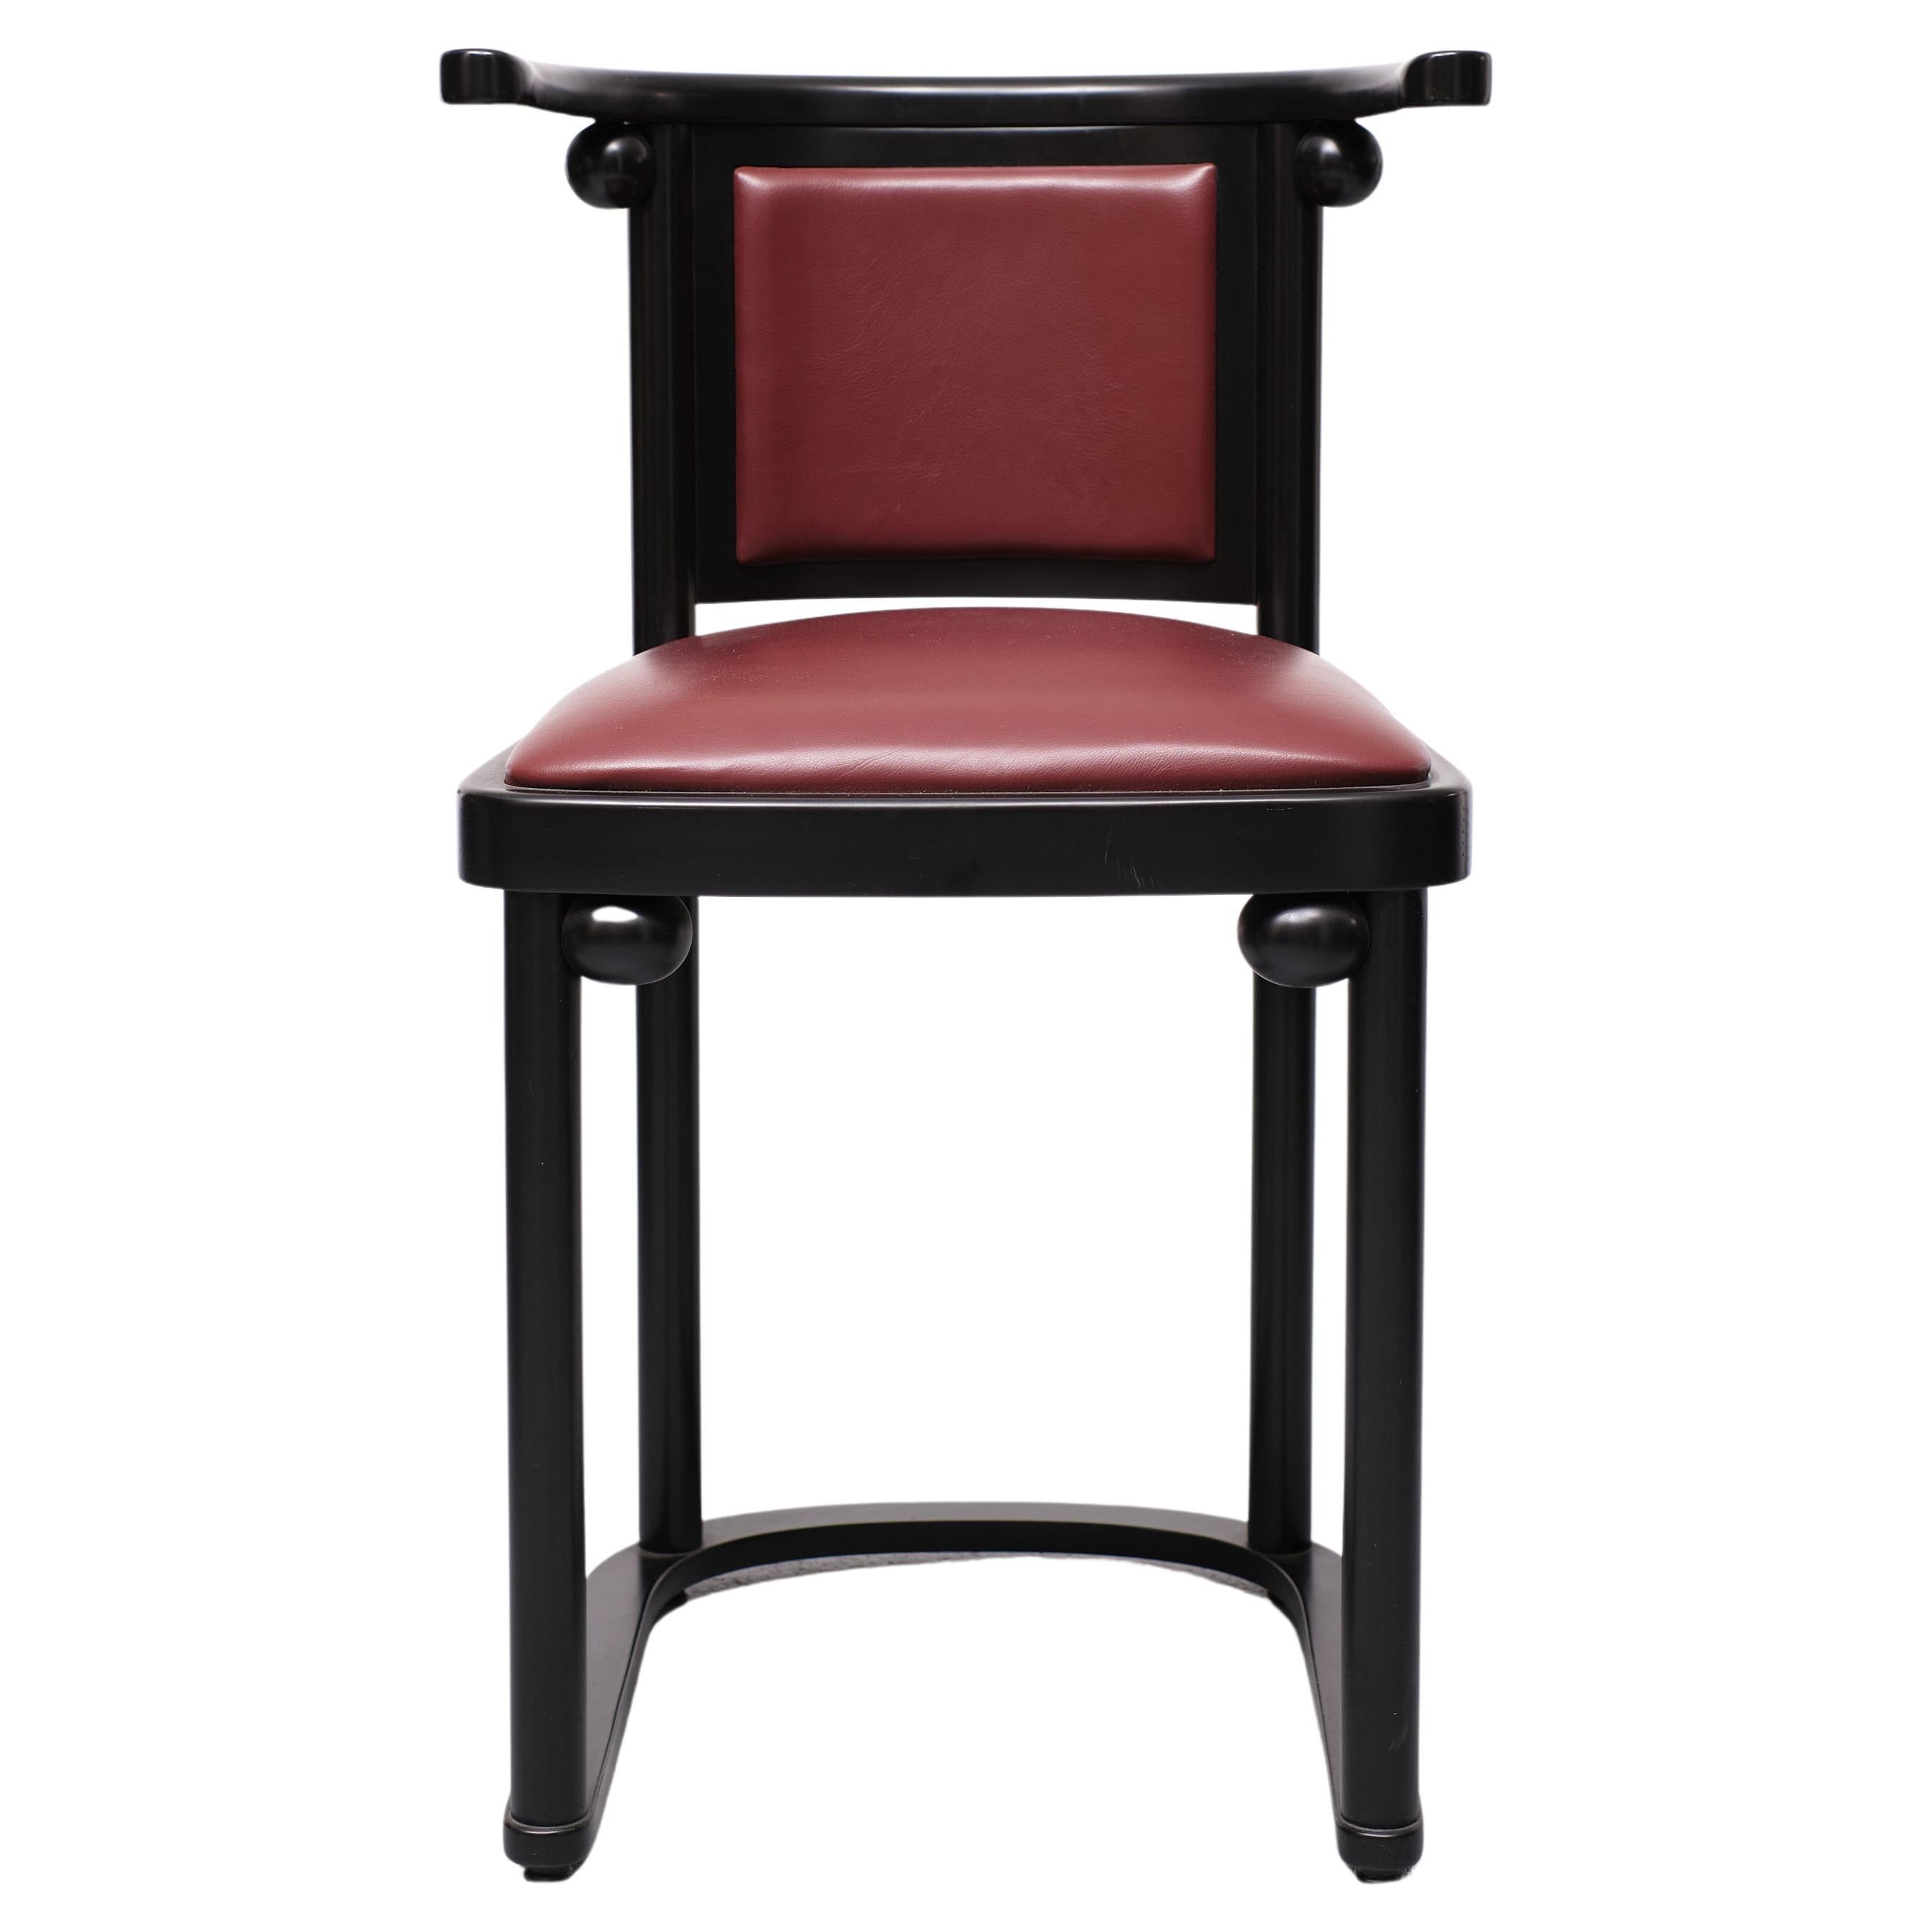 Six cafe Fledermaus armchairs. Stained Beechwood frame, comes with a Stone Red Leather upholstery. Very good condition. 
Designed in 1907 by Josef Hoffmann for the bar at the Fledermaus cabaret in Vienna. Black finished beech frame with the iconic